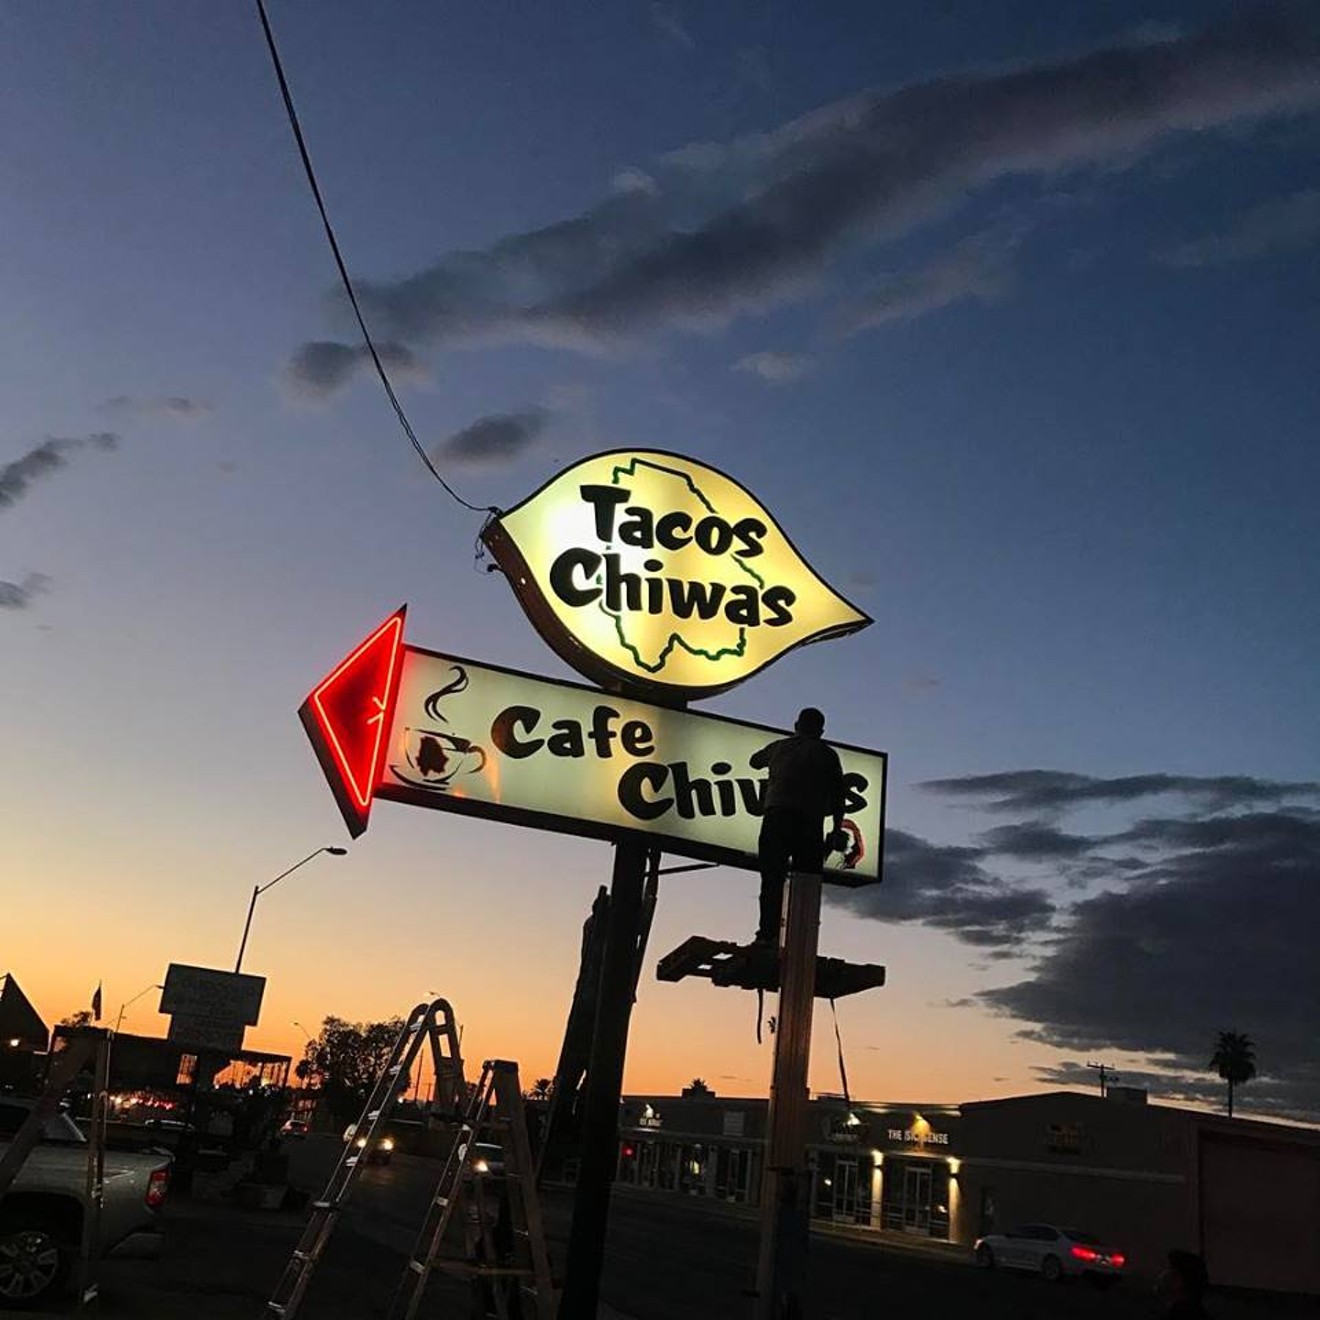 Tacos Chiwas recently installed the sign for Cafe Chiwas, the restaurant's new tamales, pastries, and coffee concept.